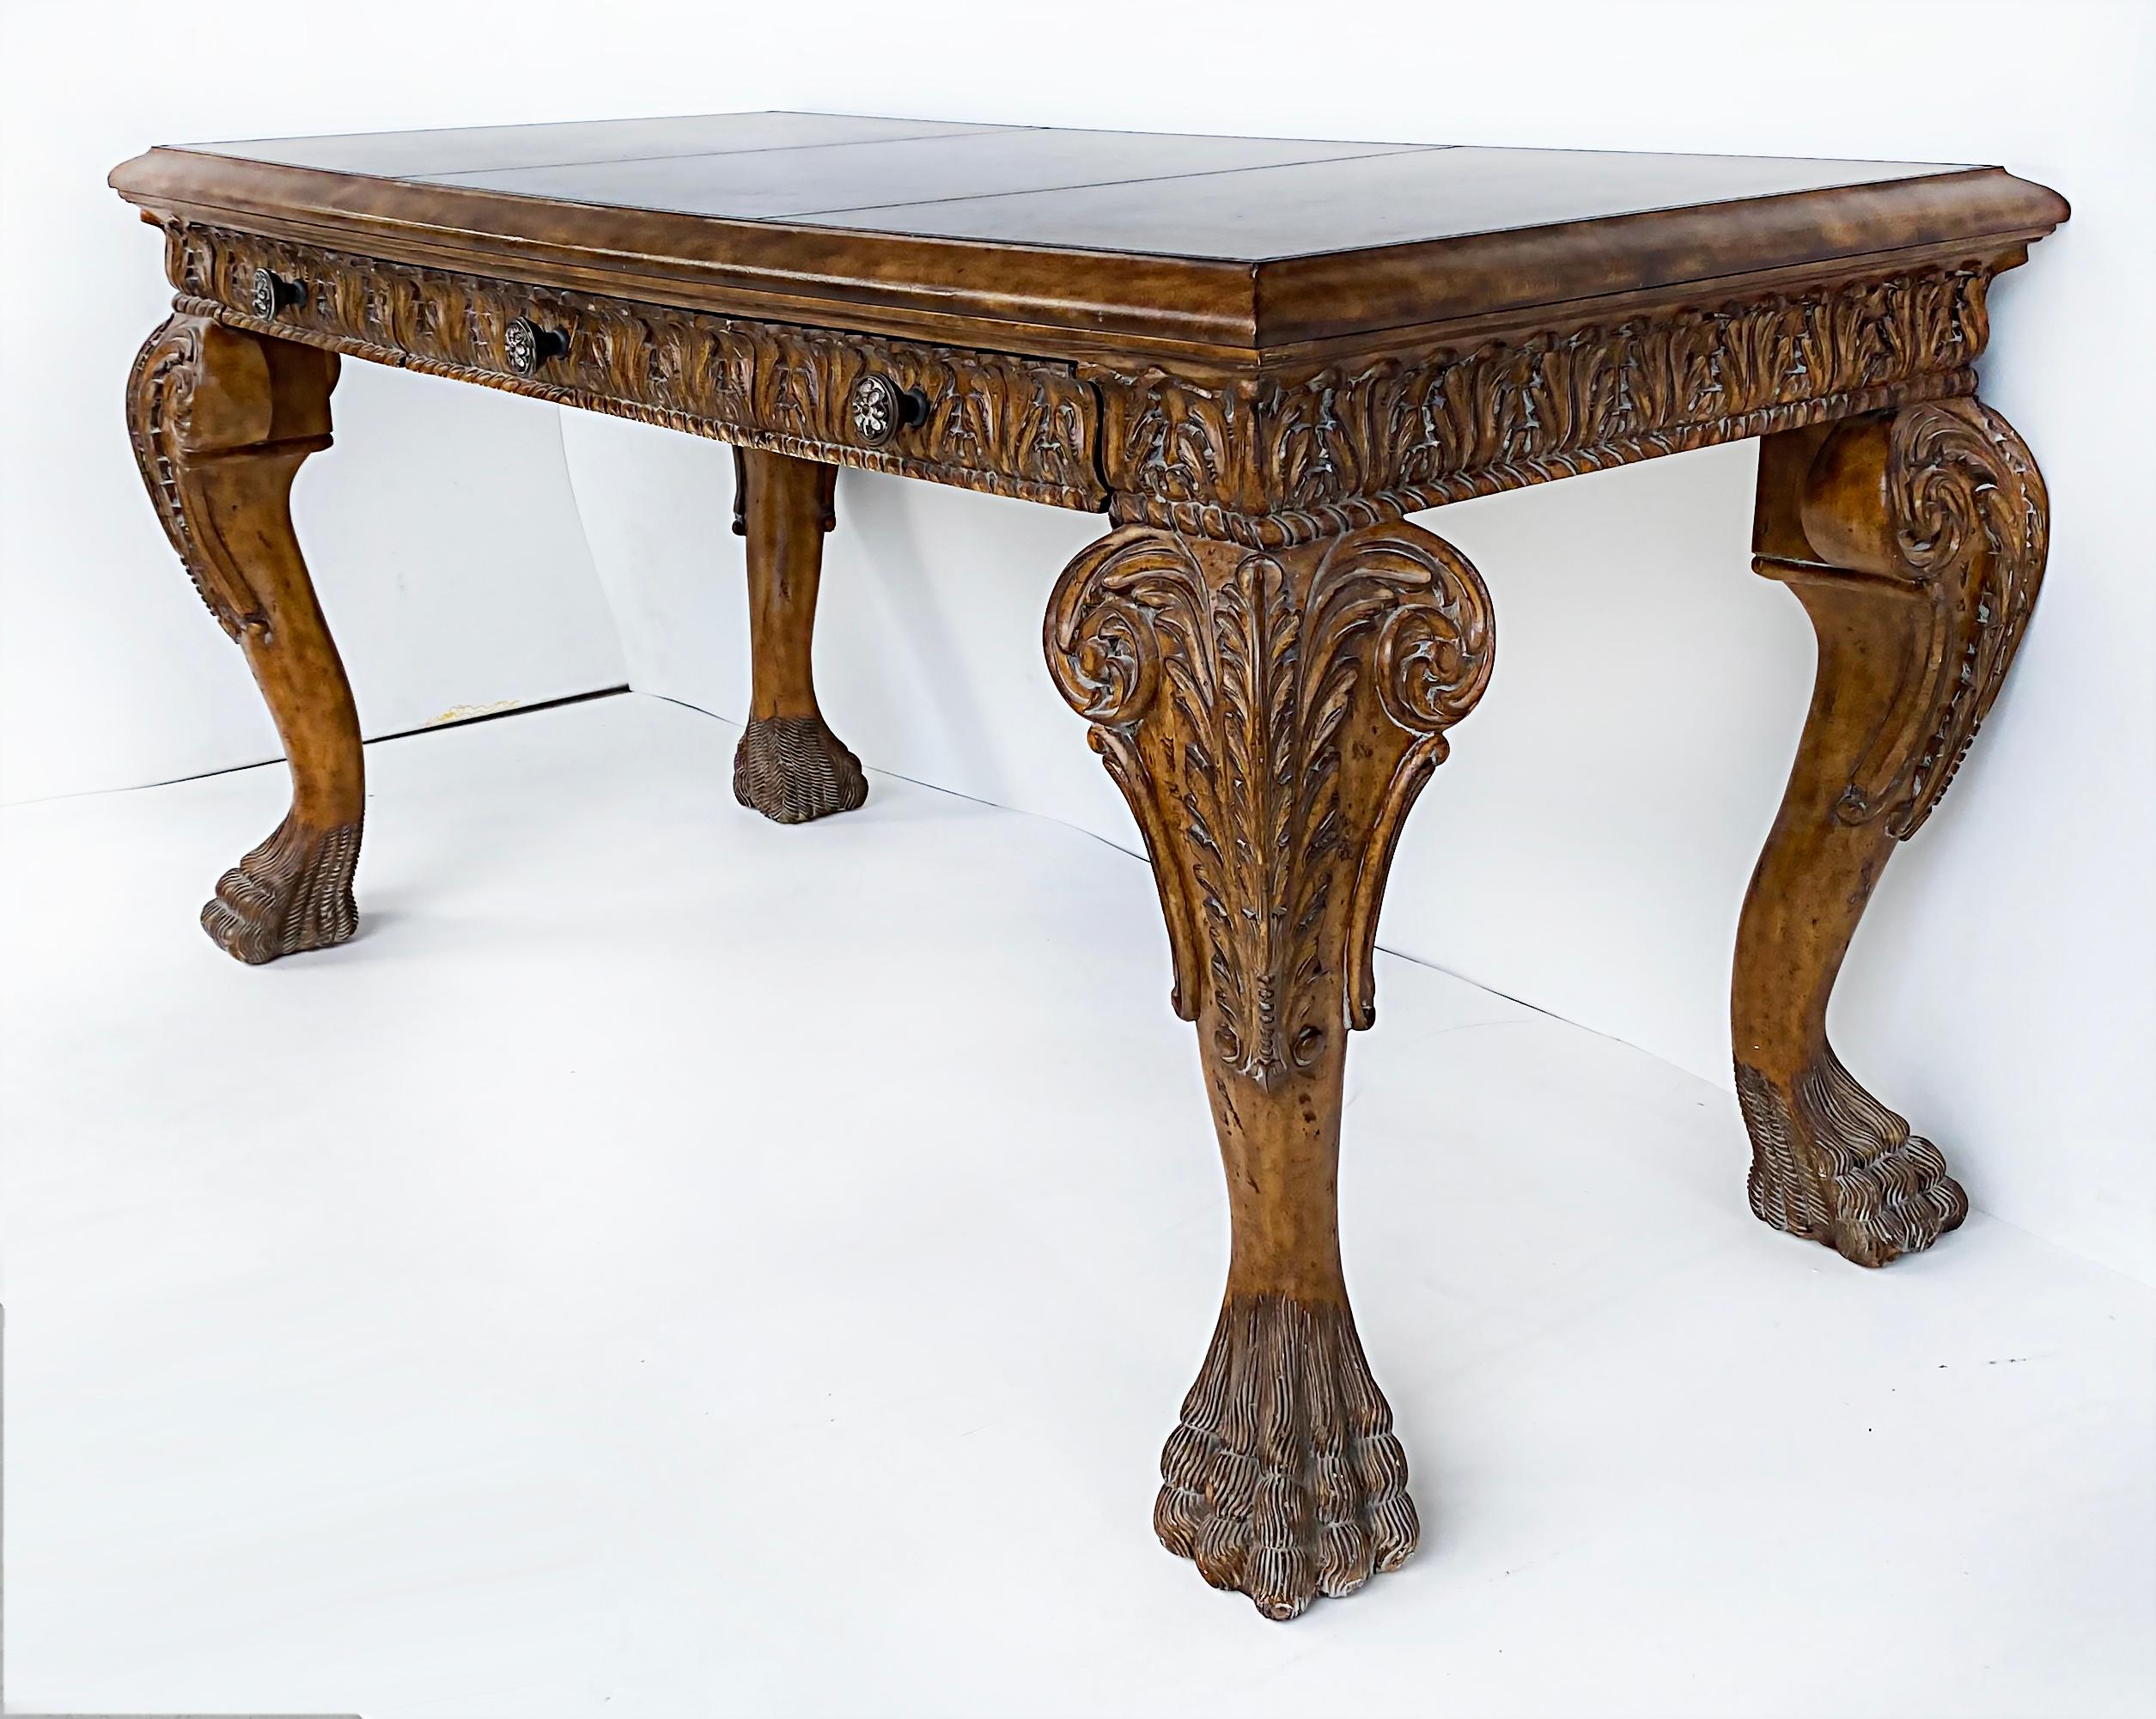 Philippine Carved Gilt Leather Writing Desk with Hairy Paw Feet, Maitland-Smith Attributed